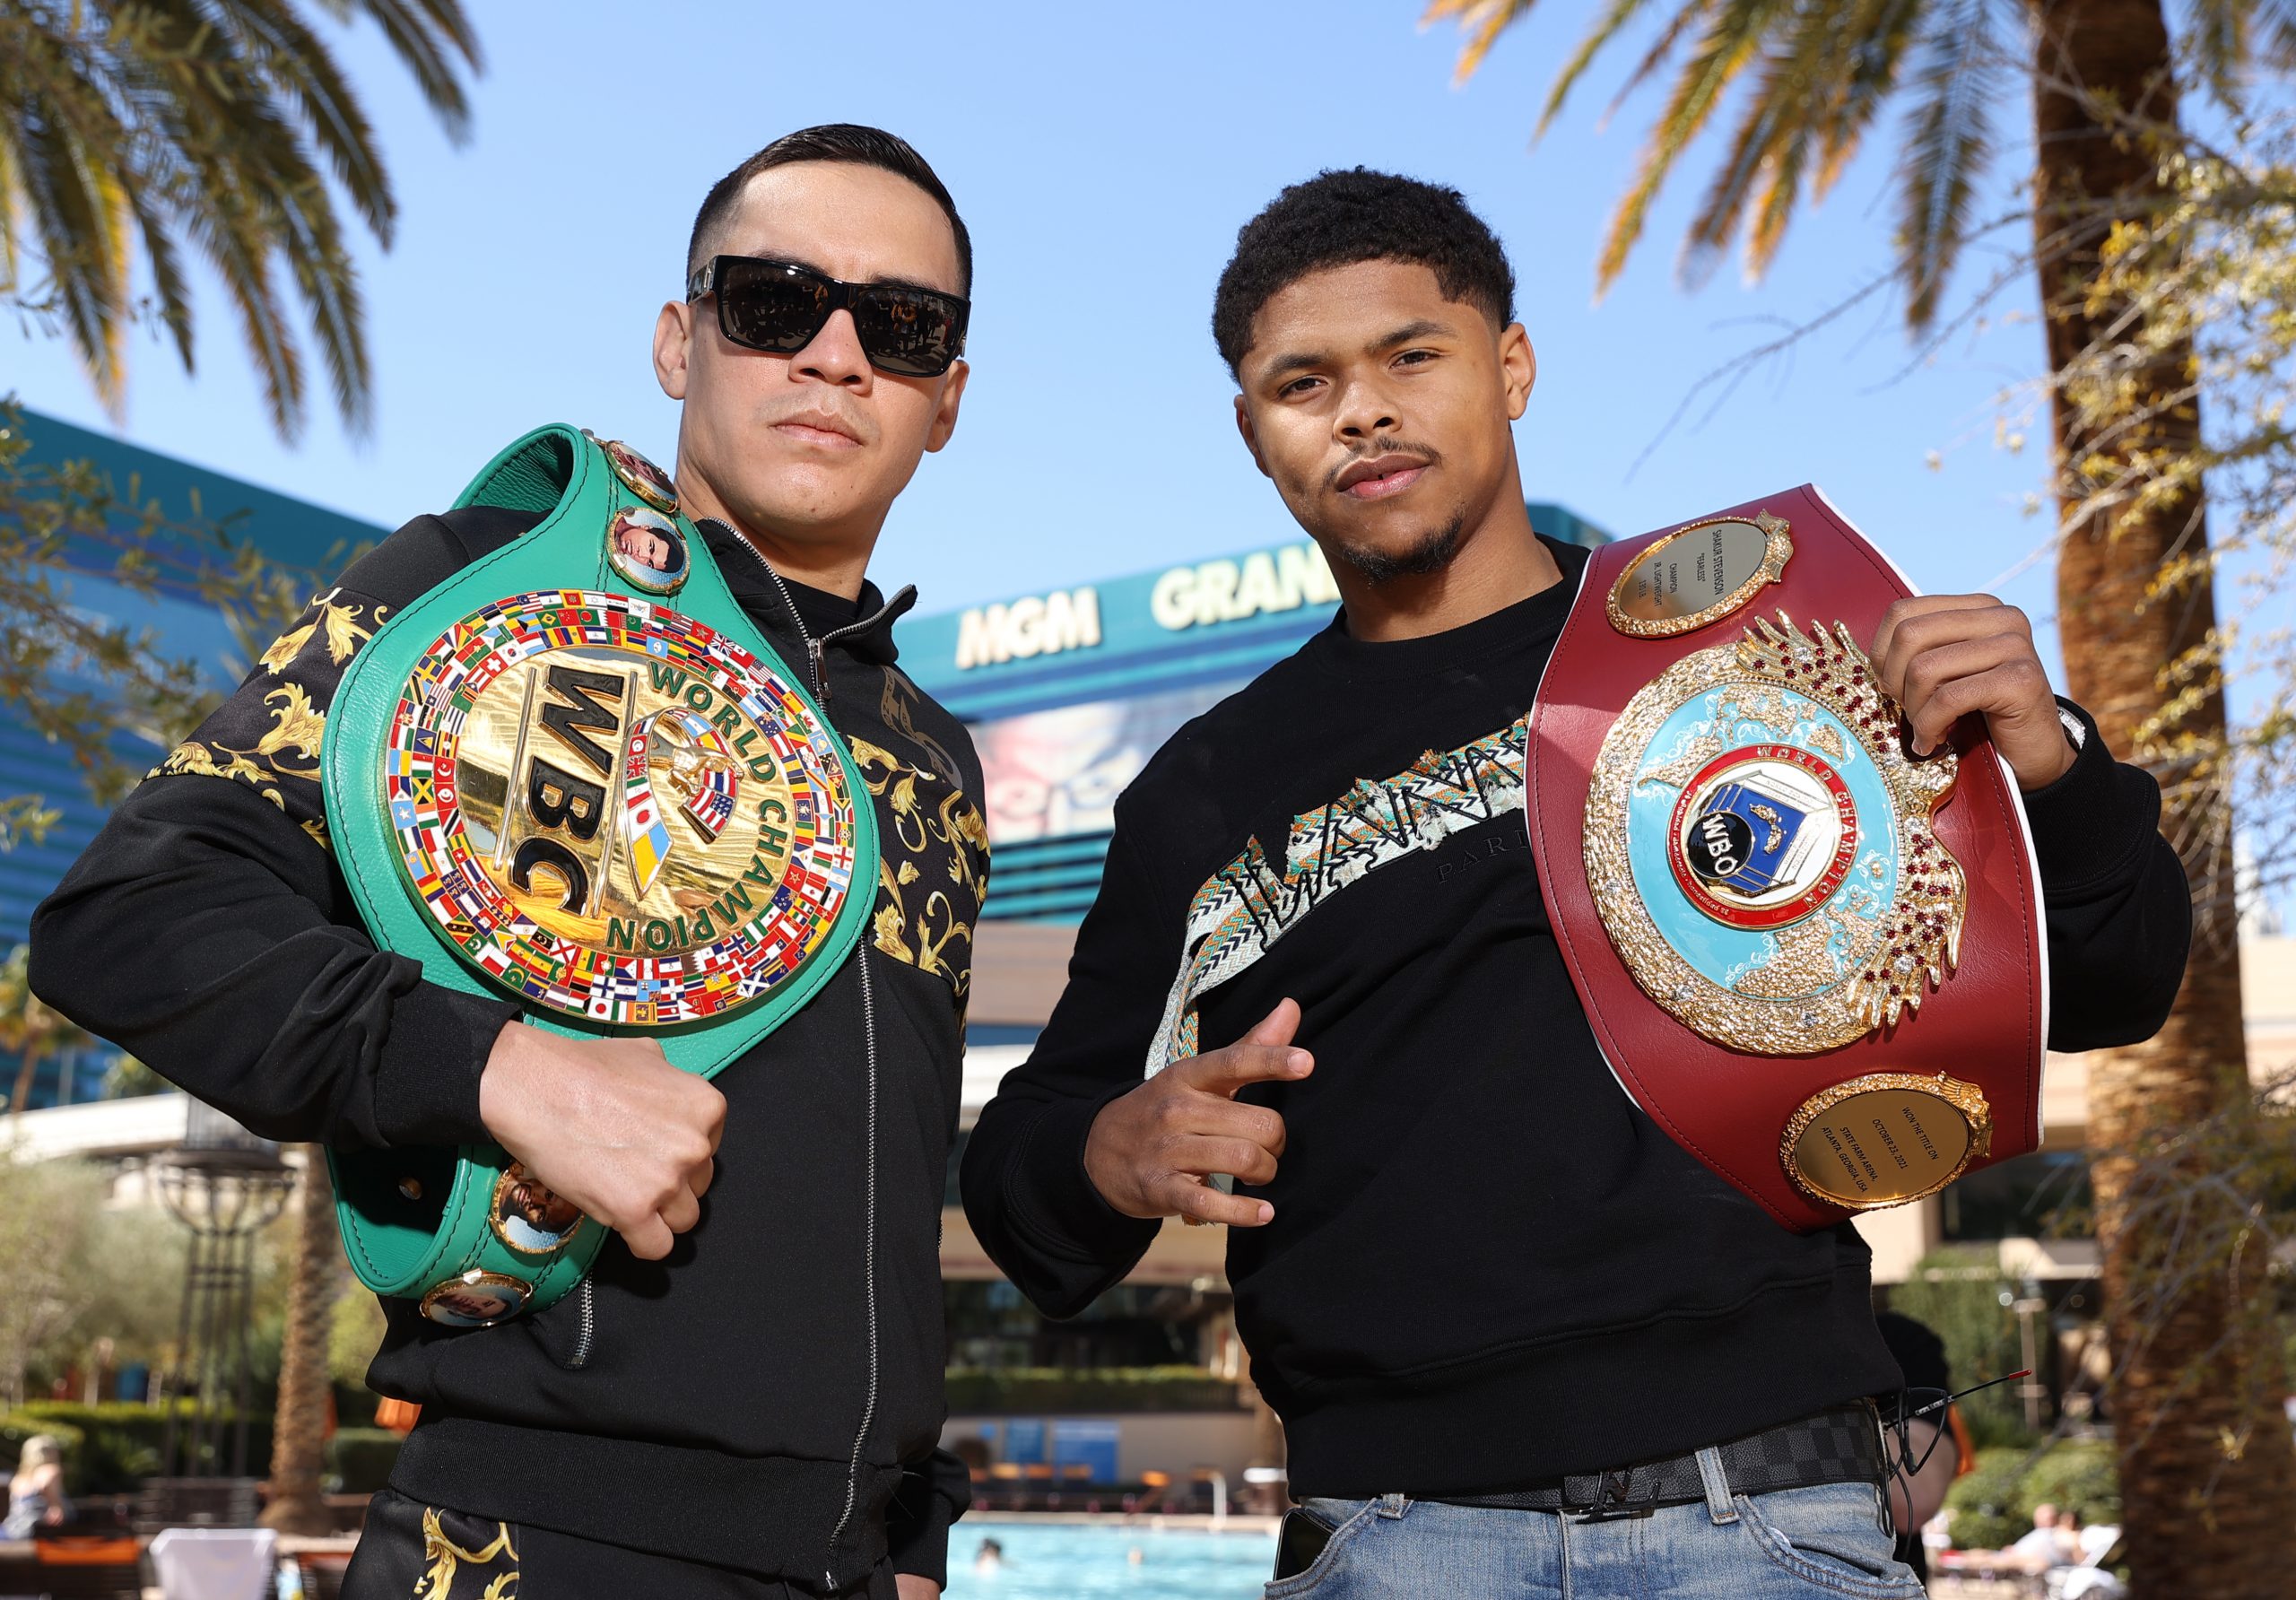 Undefeated boxers Óscar Valdez and Shakur Stevenson are ready for an  intense unification fight in Las Vegas - Las Vegas Magazine